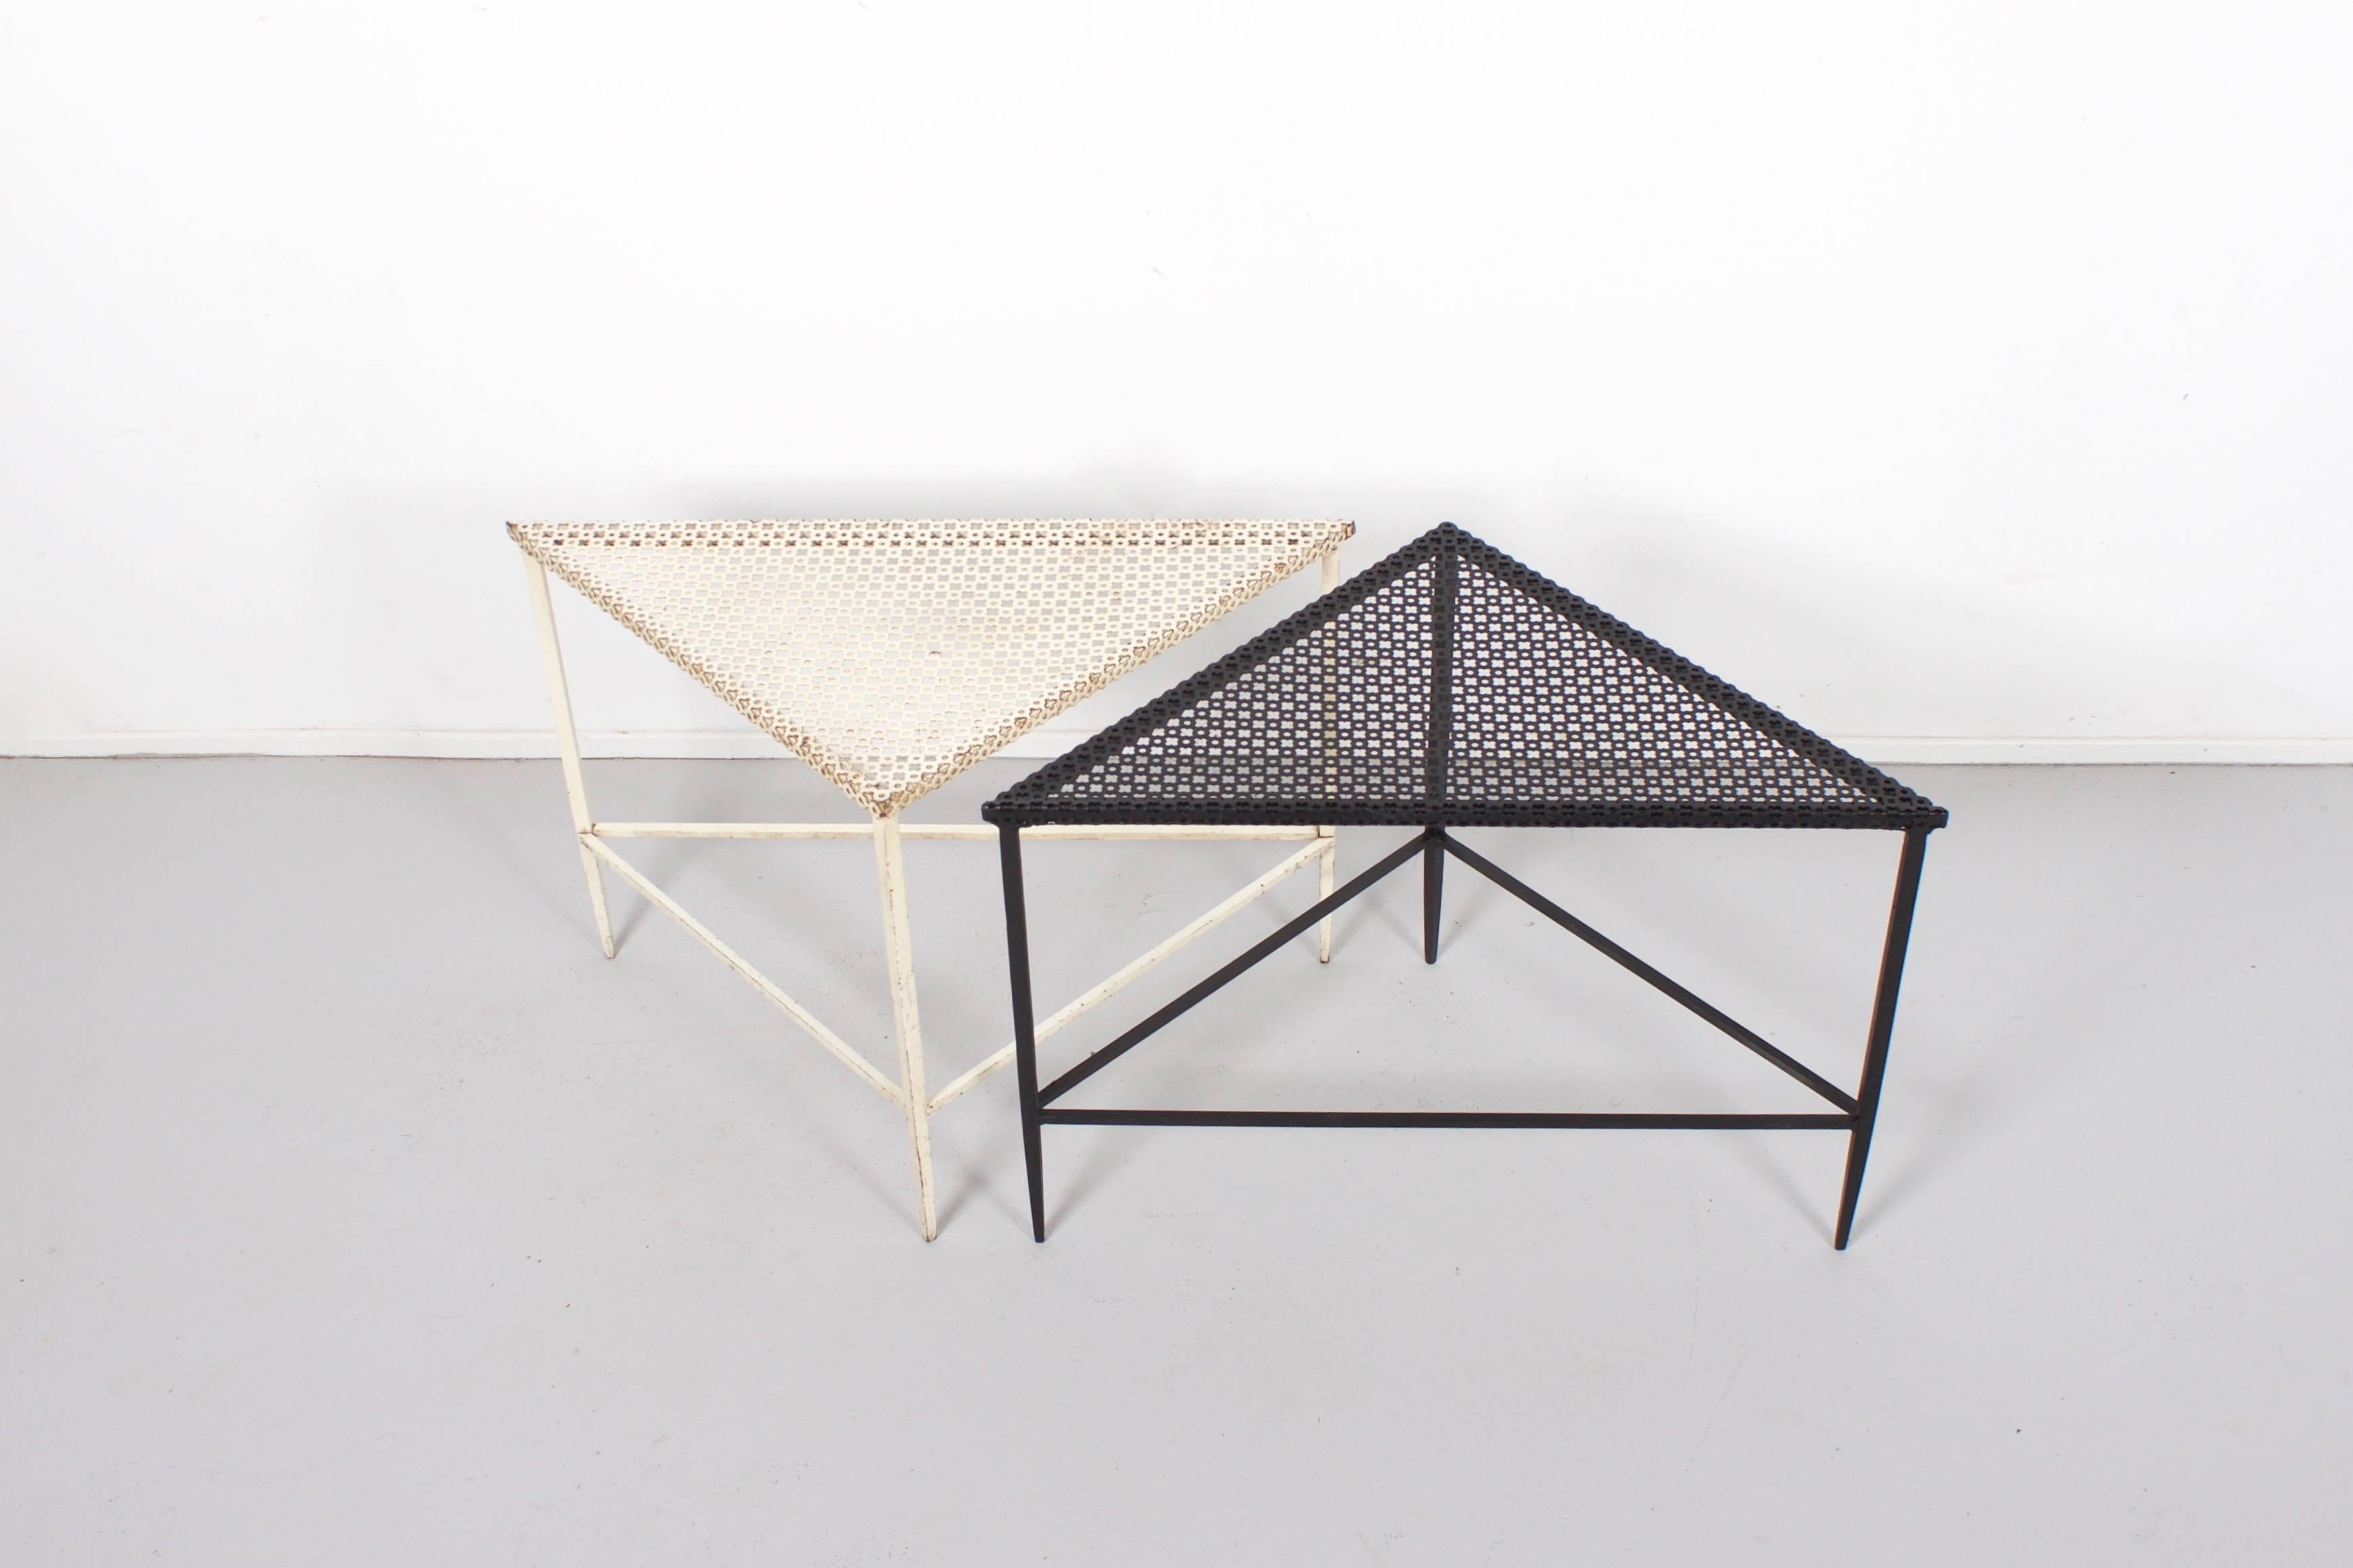 Beautiful pair of Mathieu Matégot tables in good condition.

Manufactured by Artimeta in the 1950s

Perforated metal top and frame lacquered in black and white. 

Because of the triangular shape of the tables they can be combined in many